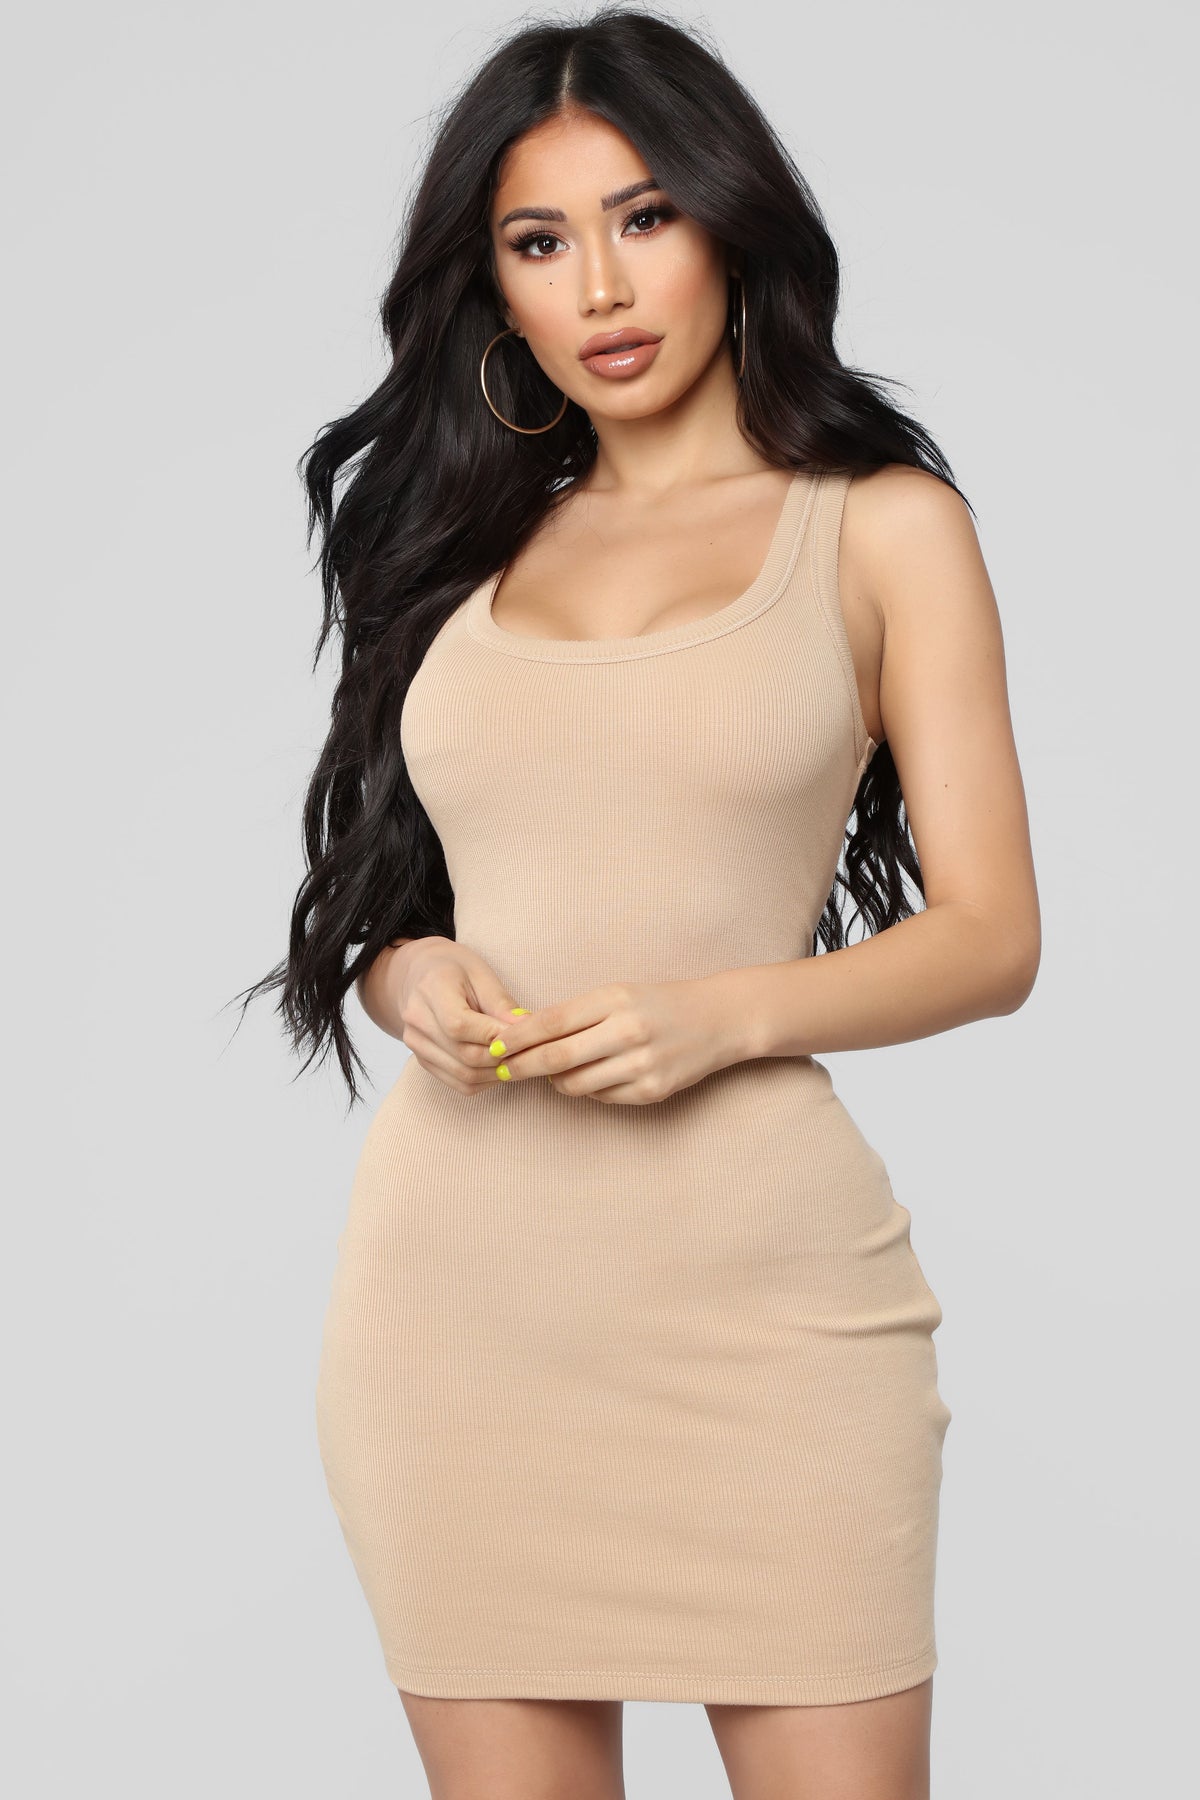 One of the Boys Dress - Nude